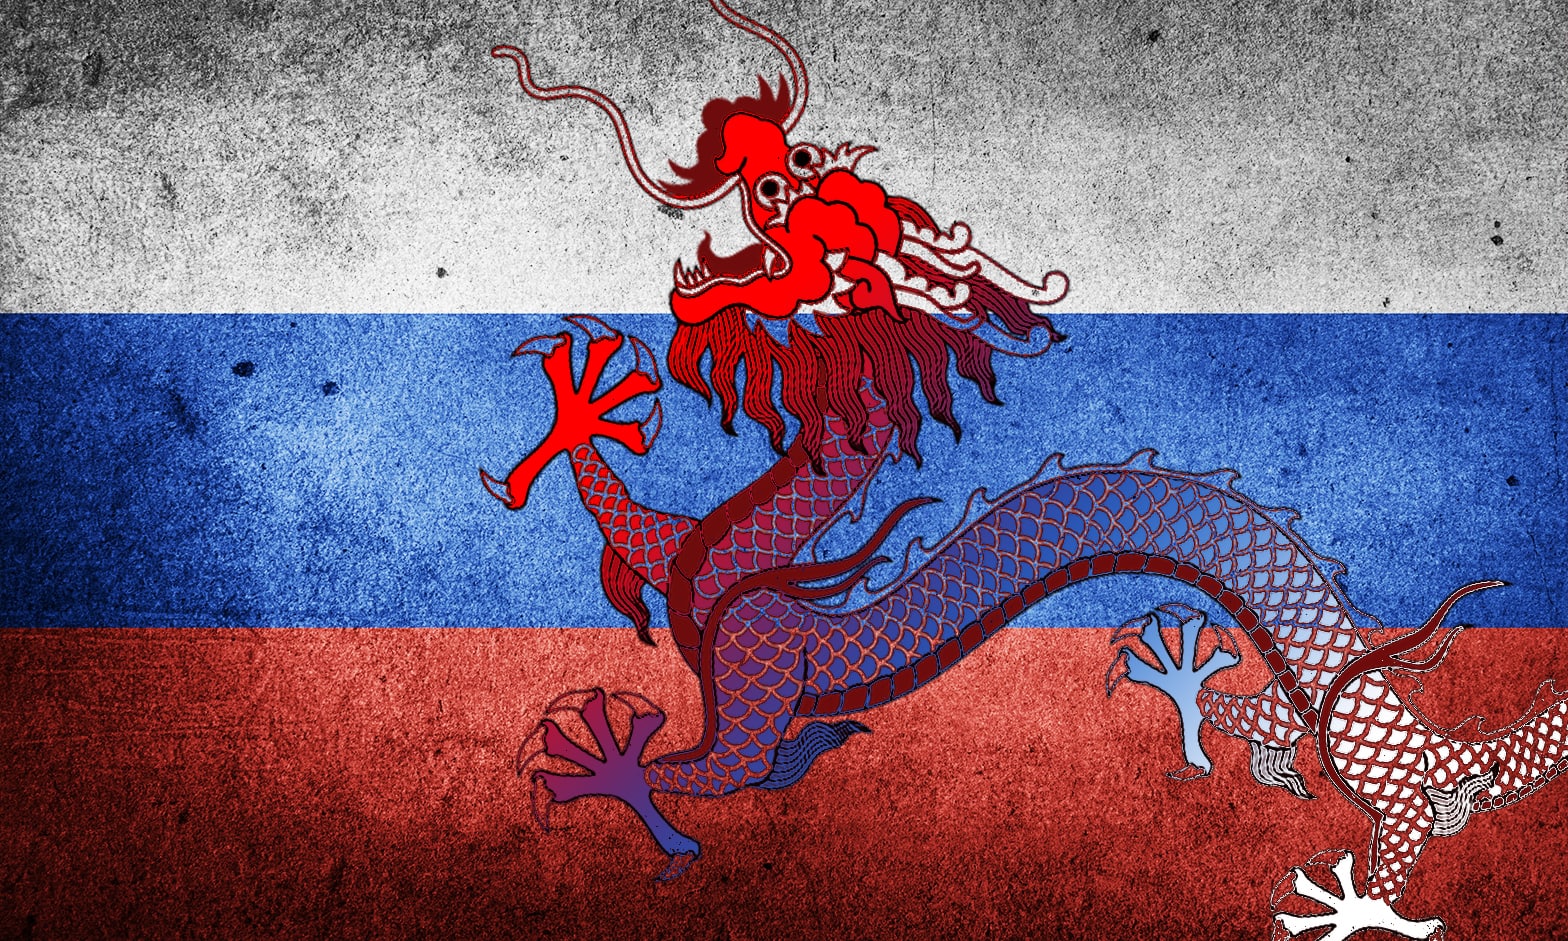 Article Header Design: “China, with or against Russia?”